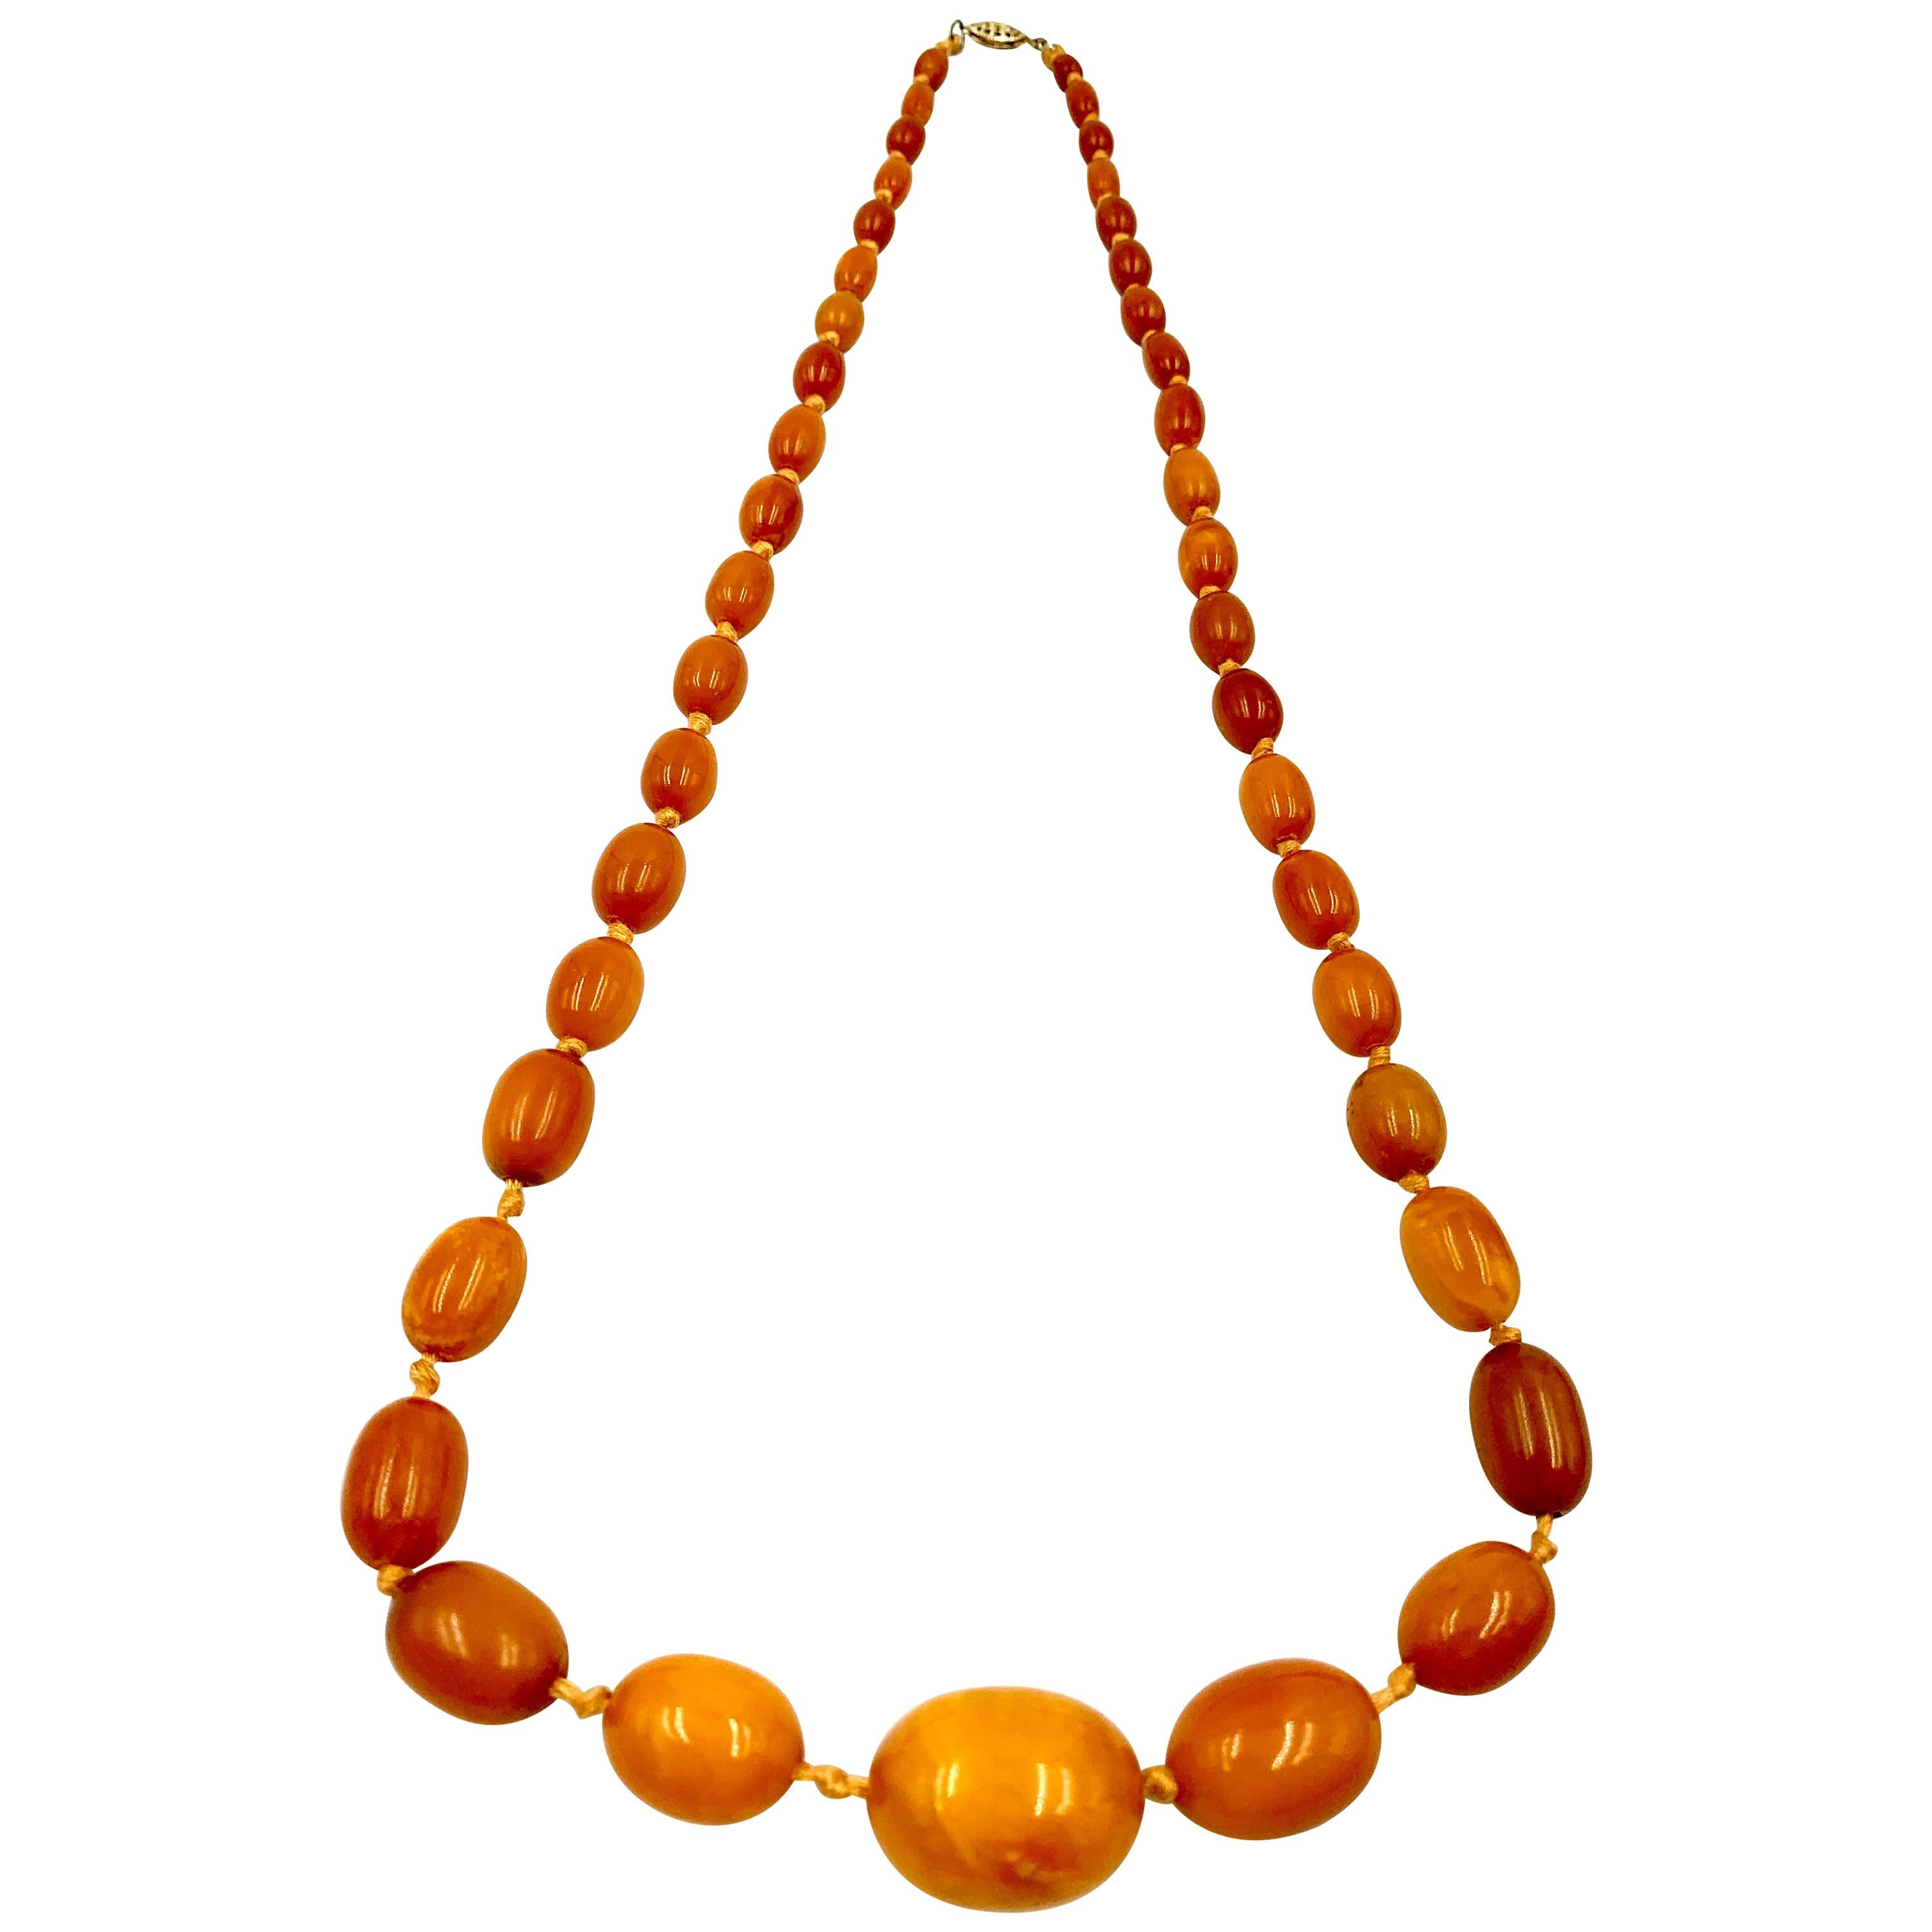 Bead Classic Antique Butterscotch Baltic Amber and 14 Karat Gold Long Necklace